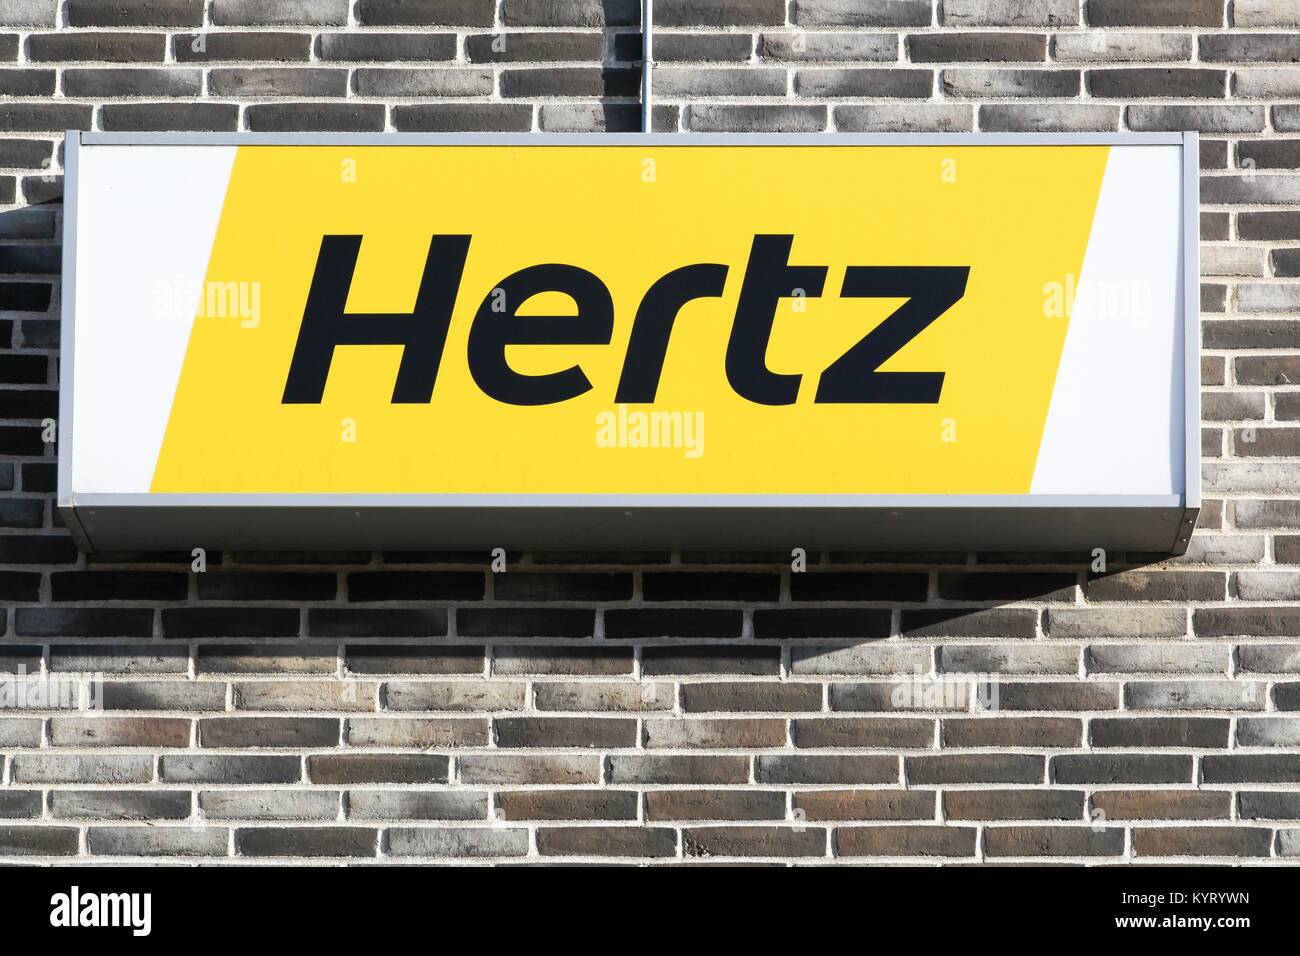 Aalborg, Denmark - July 13, 2017: Hertz logo on a panel. Hertz is an American car rental company with international locations in 145 countries Stock Photo